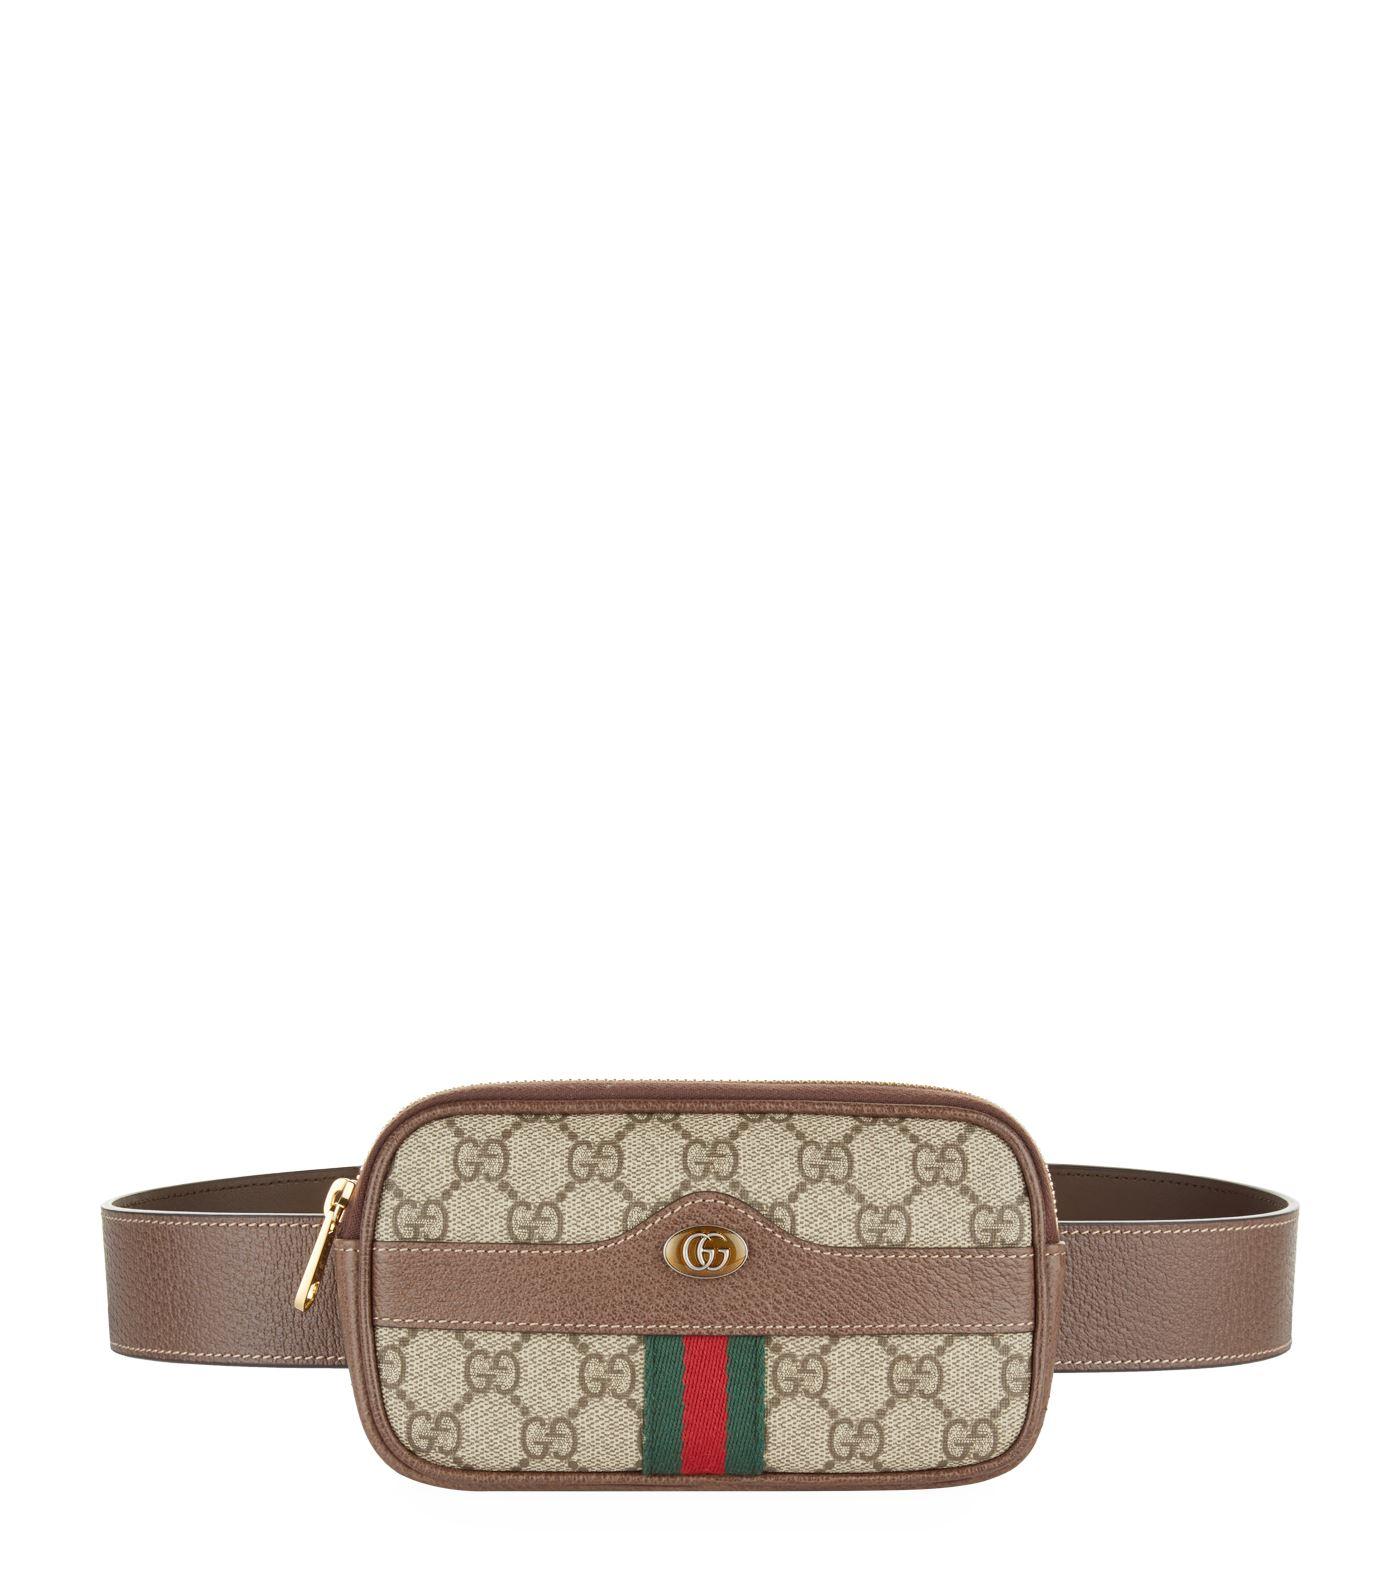 Gucci Ophidia Suede Belt Bag in Brown - Lyst